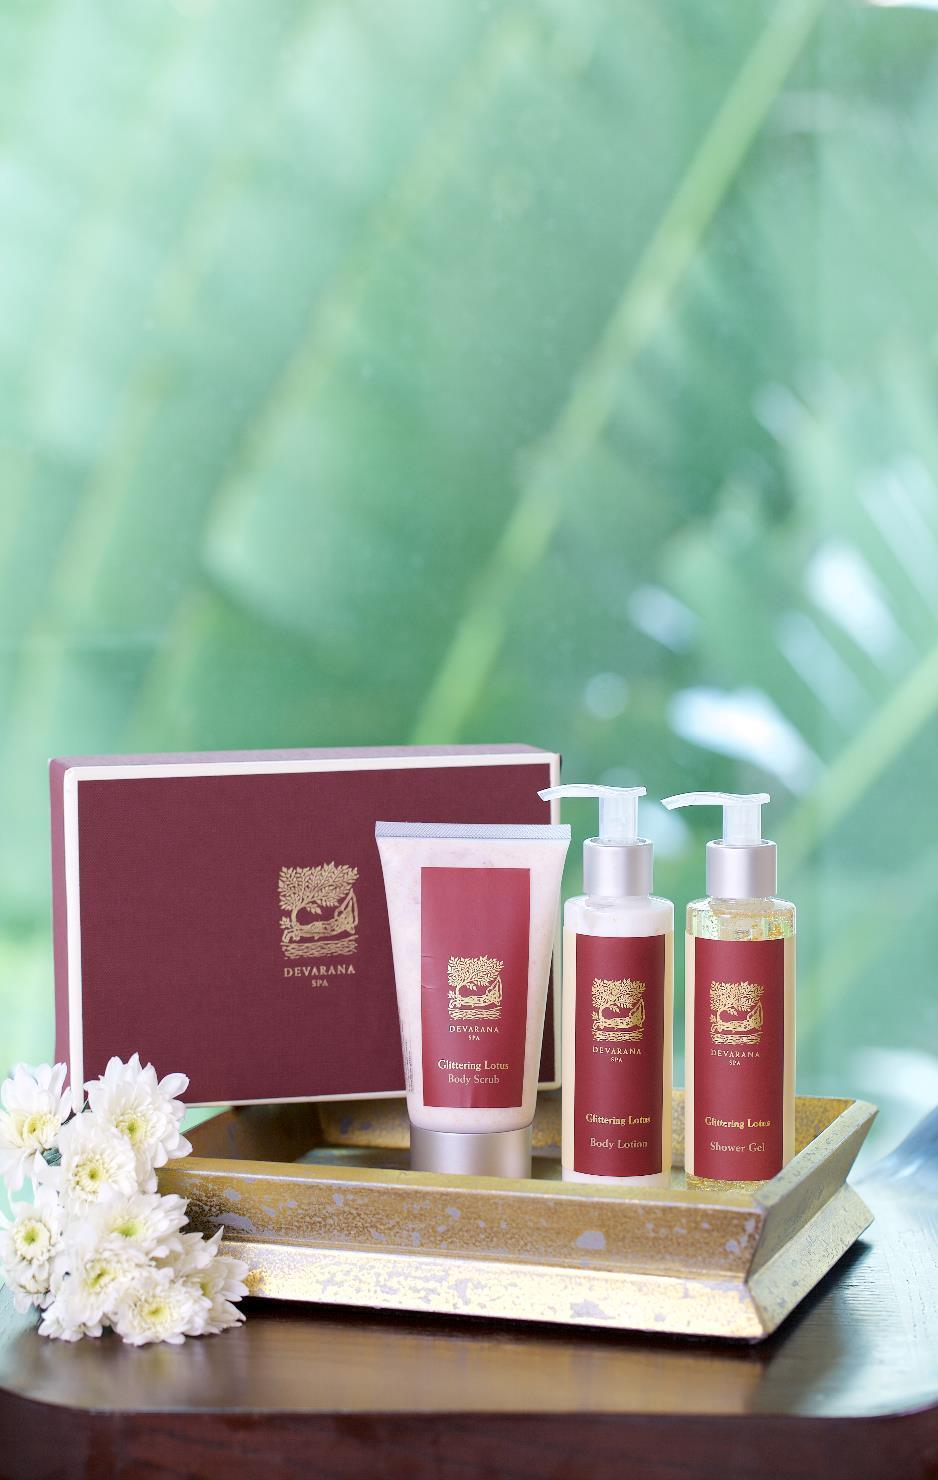 Box Set Collection Glittering Lotus Rejuvenation Set The gold mineral is highly beneficial to skin for its detoxifying, antiaging and brightening benefits whist Lotus